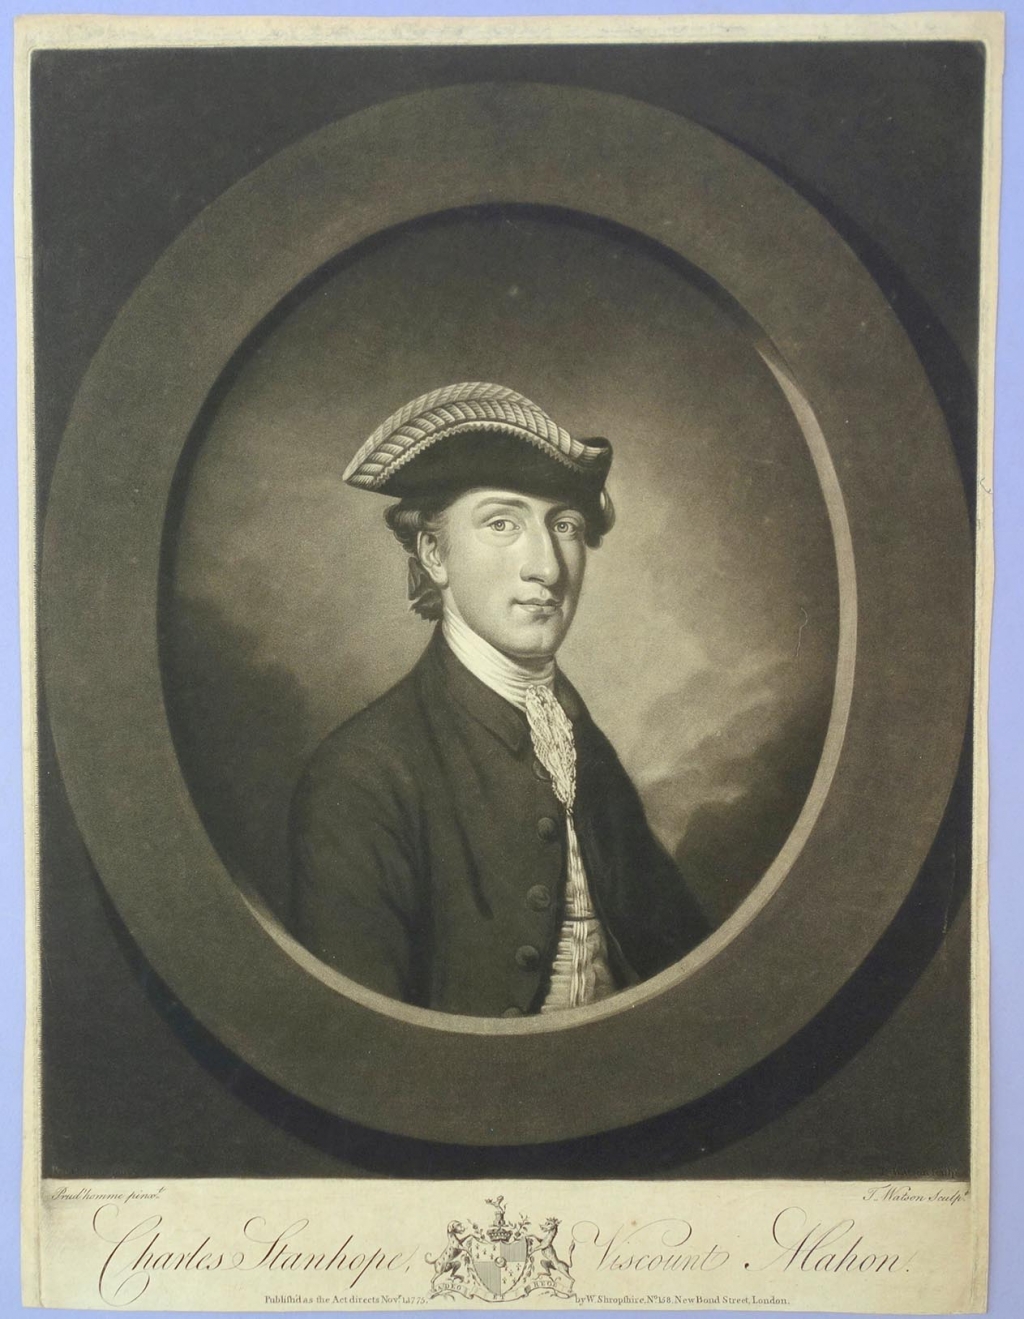 Mezzotint portrait of Lord Stanhope engraved by T. Watson after a painting by Prud